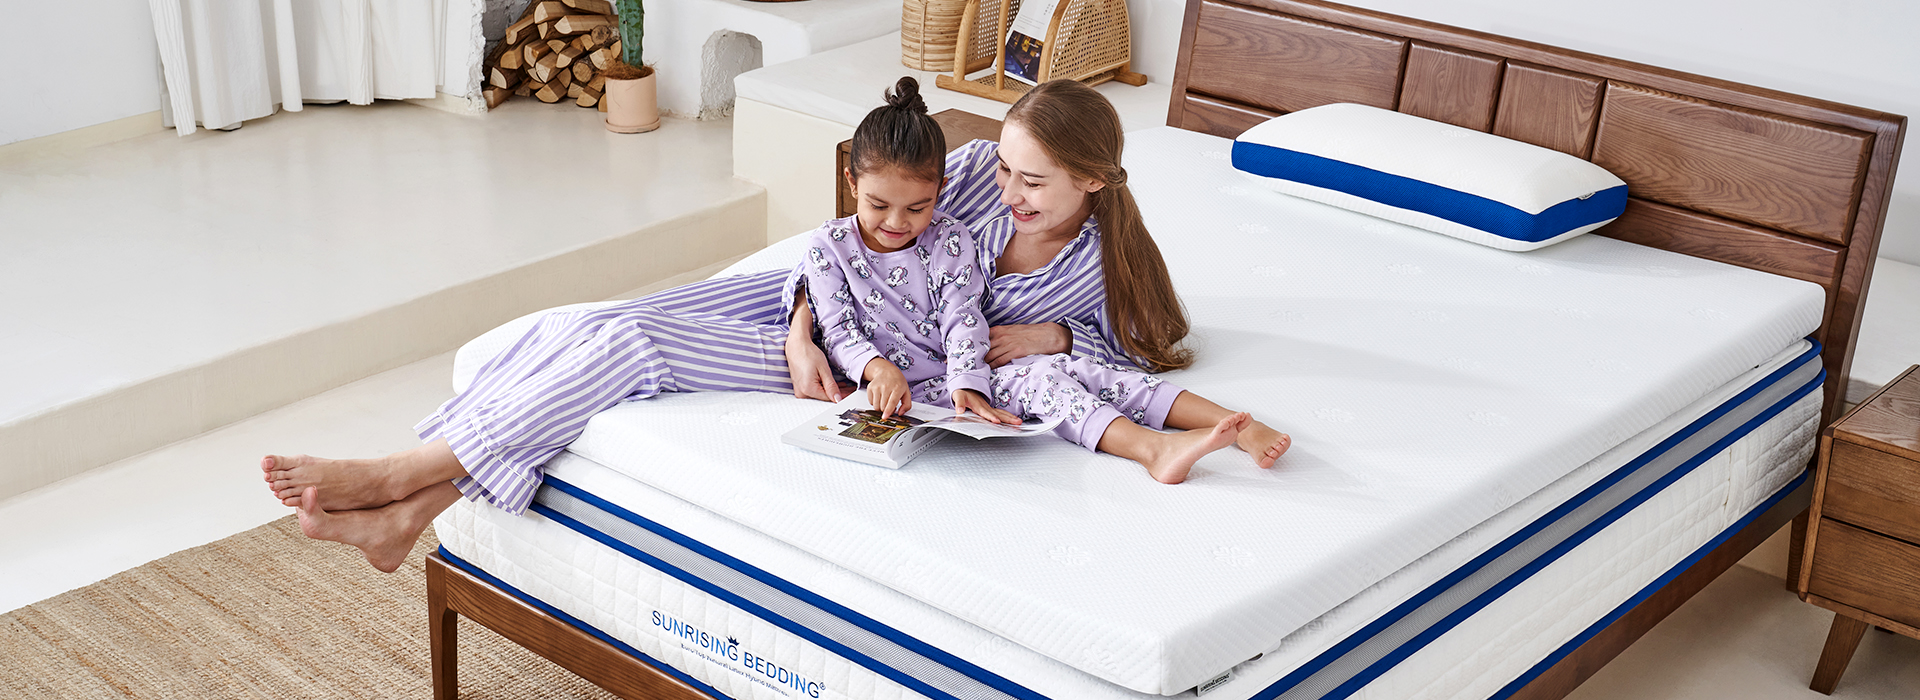 are sunrising bedding mattresses made in china